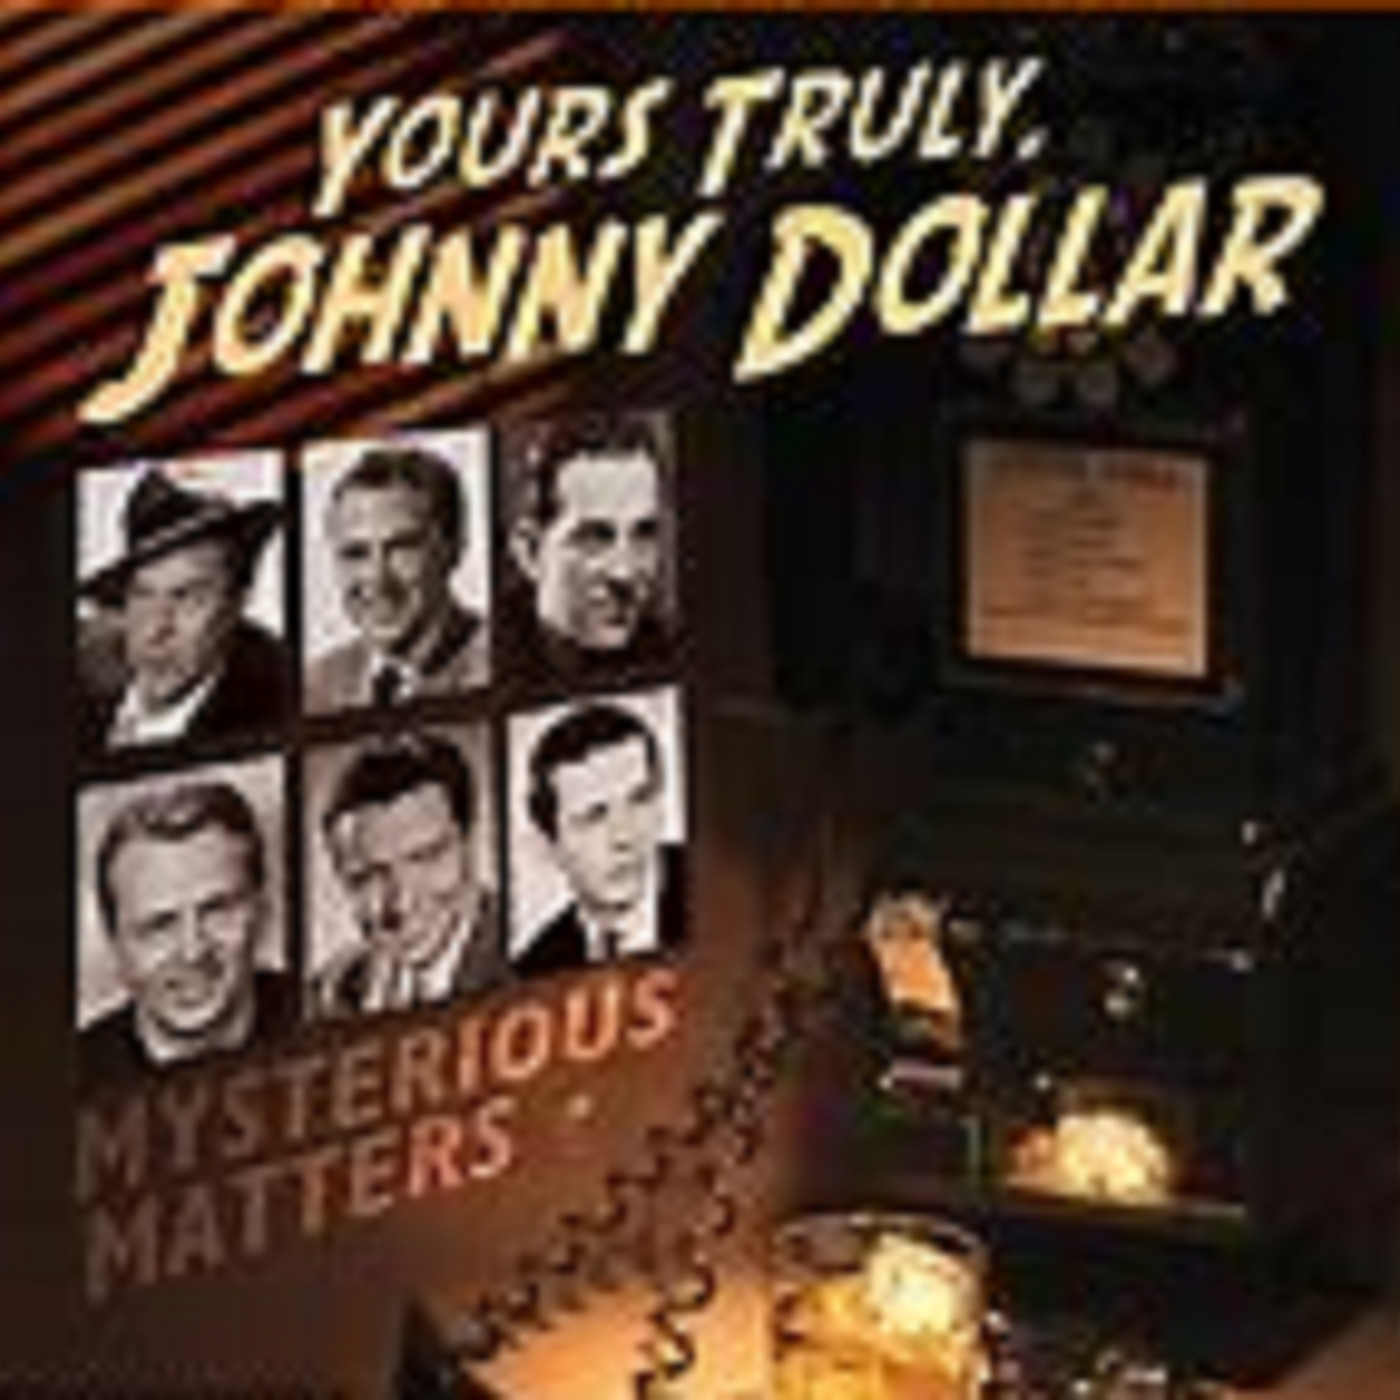 Yours Truly, Johnny Dollar - 032562, episode 784 - The Shadow of a Doubt Matter